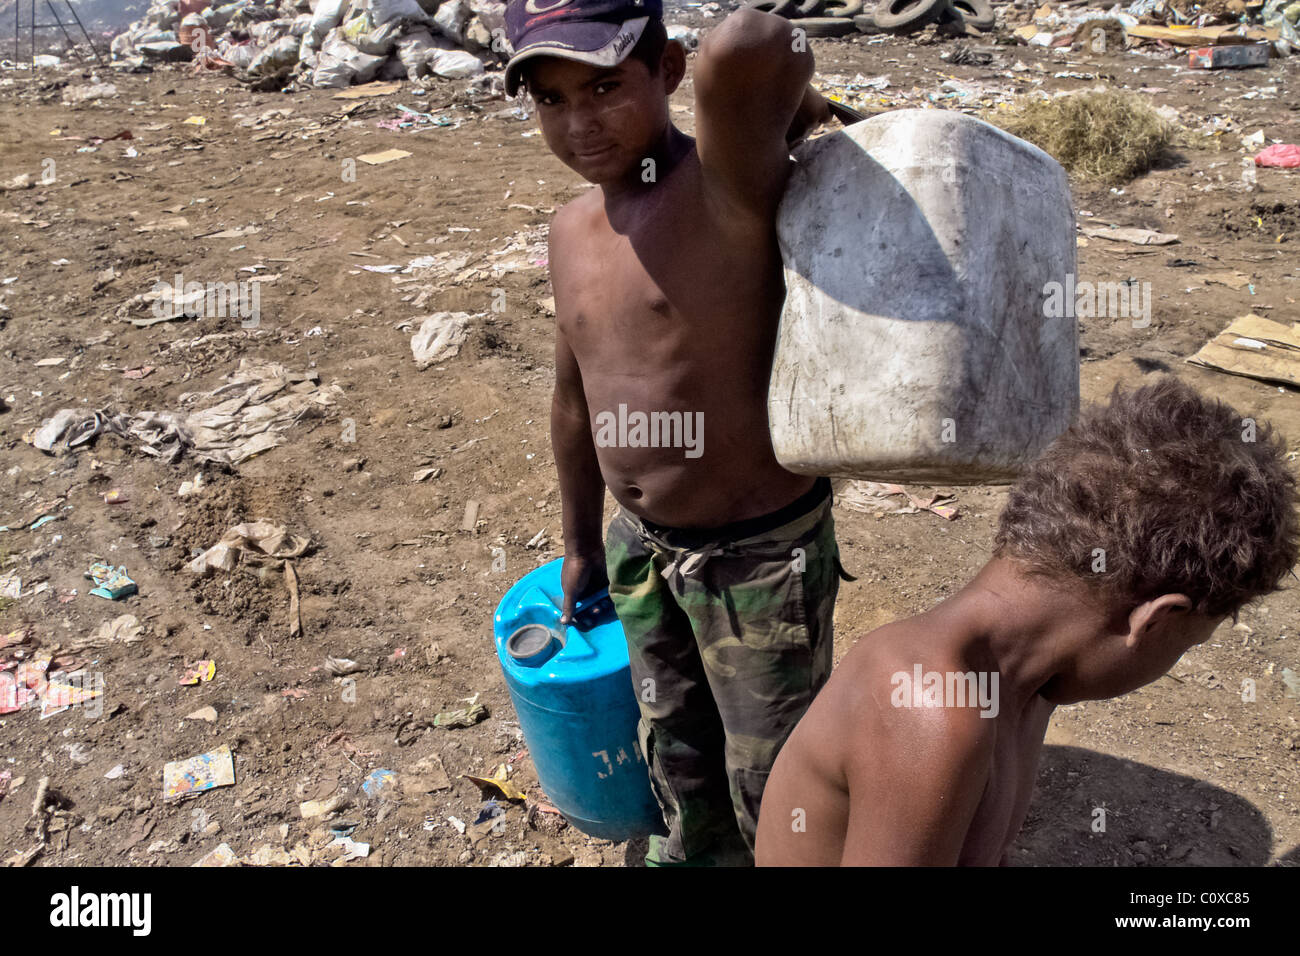 A Nicaraguan boy carries barrels of contaminated water for drinking in the garbage dump La Chureca, Managua, Nicaragua. Stock Photo